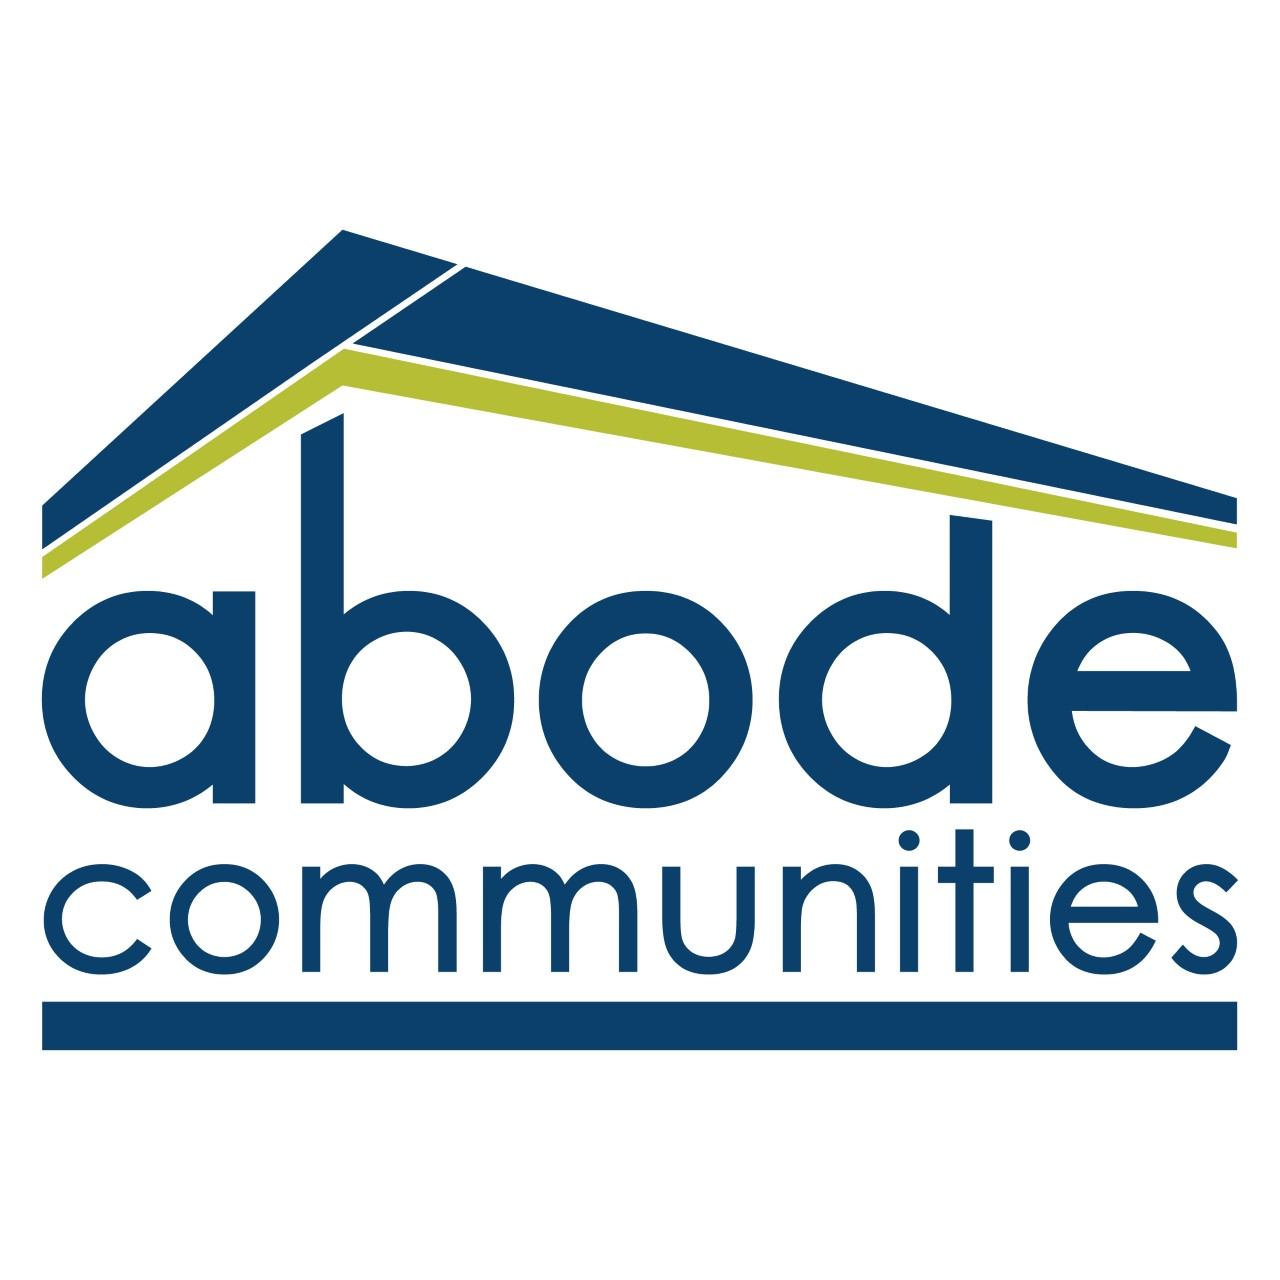 Abode Communities logo, lettering all lower case framed in the outline of a house in blue with green accent.